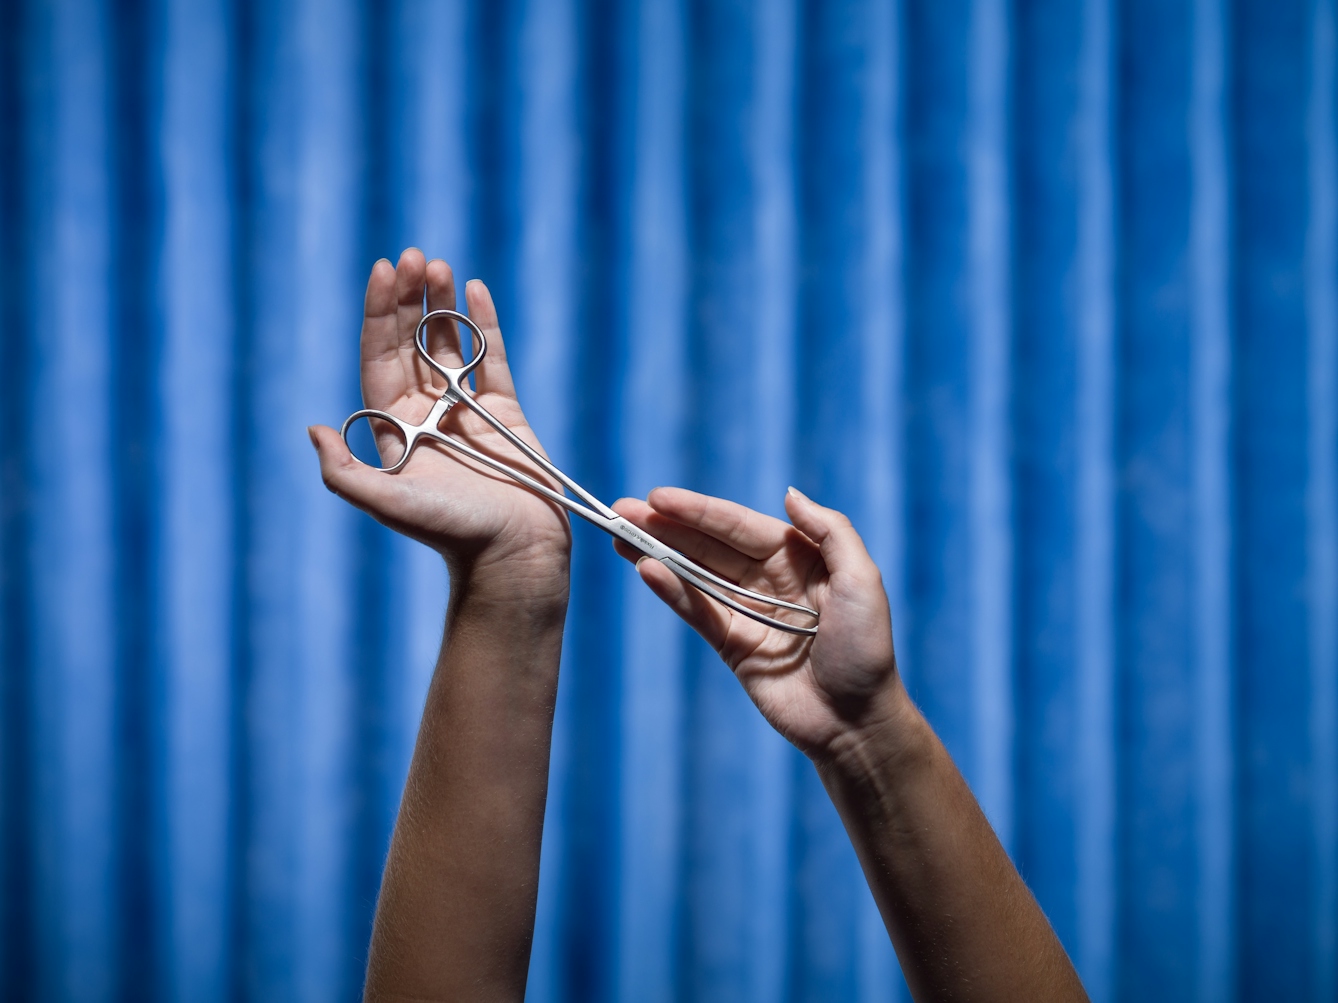 Photograph of a pair of hands cradling a set of forceps. Photographed against a background of blue antibacterial clinical curtains.